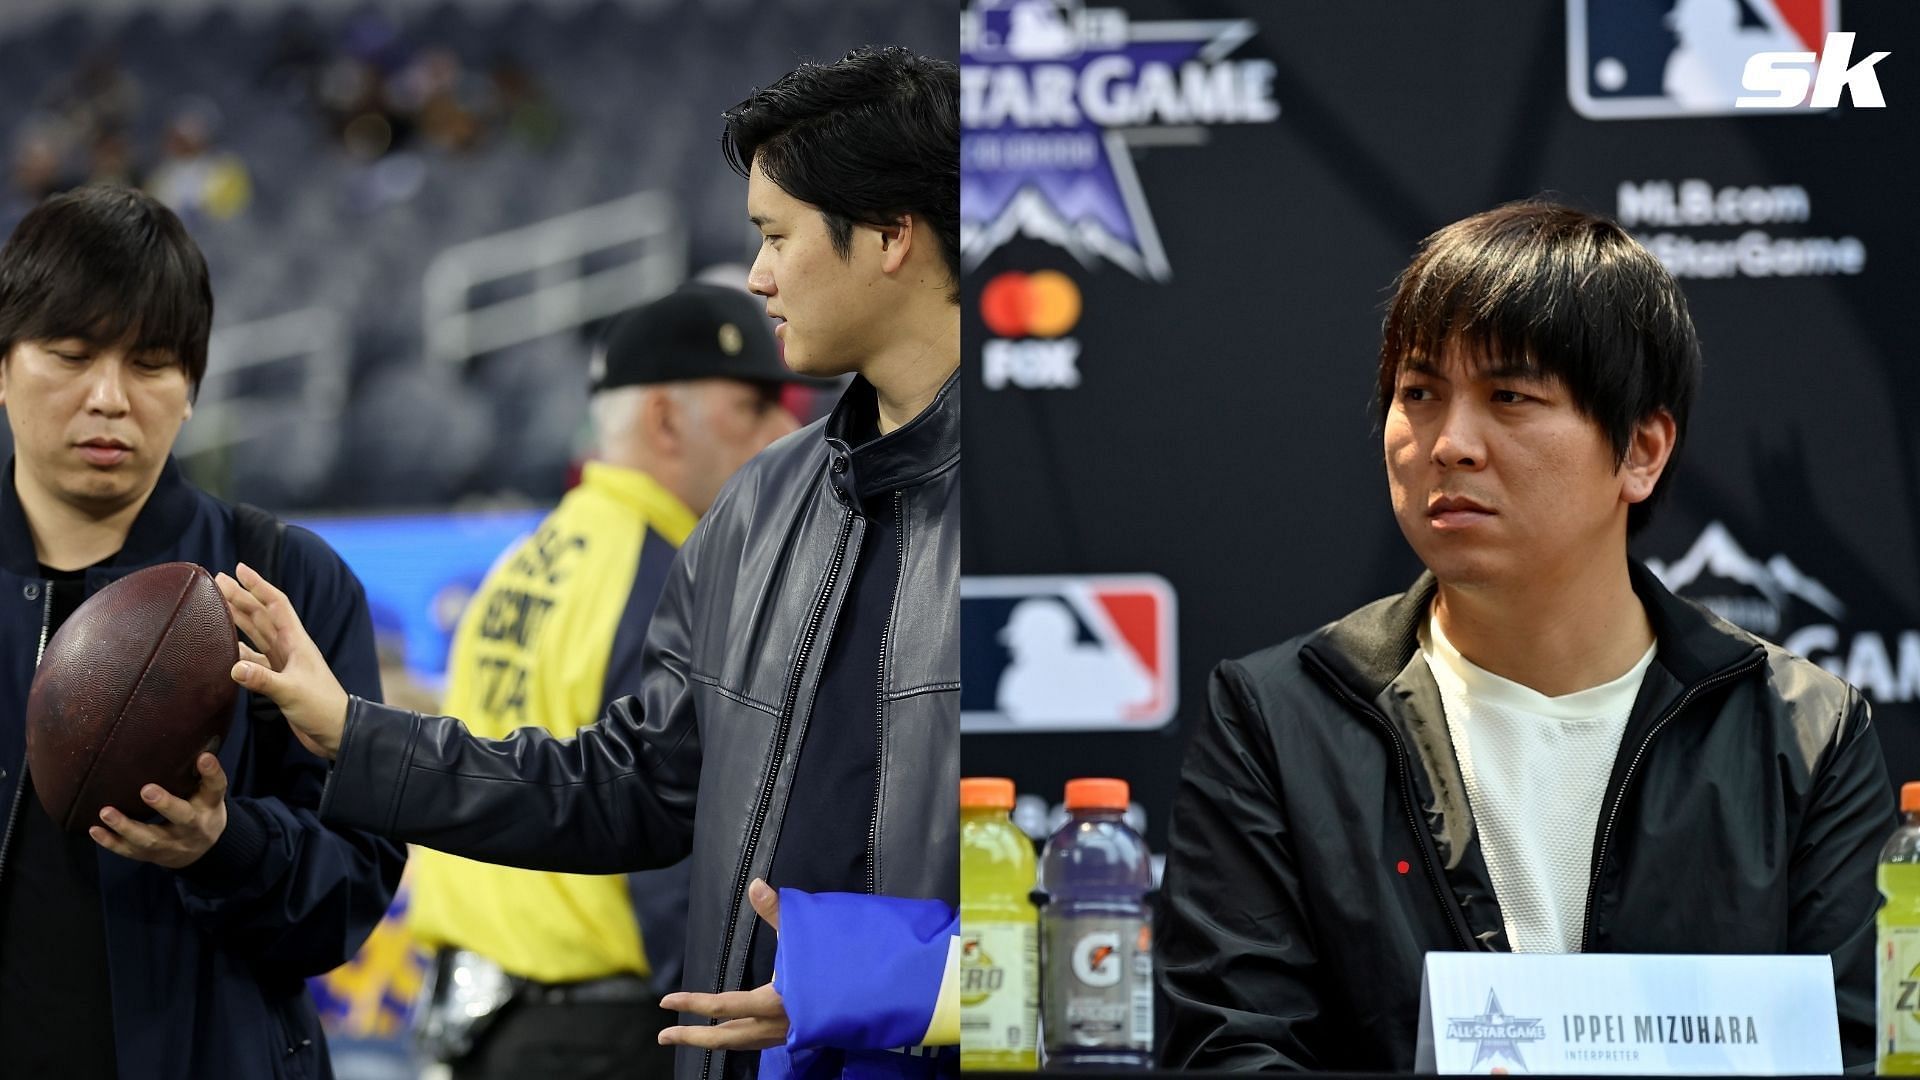 The IRS is looking into Shohei Ohtani